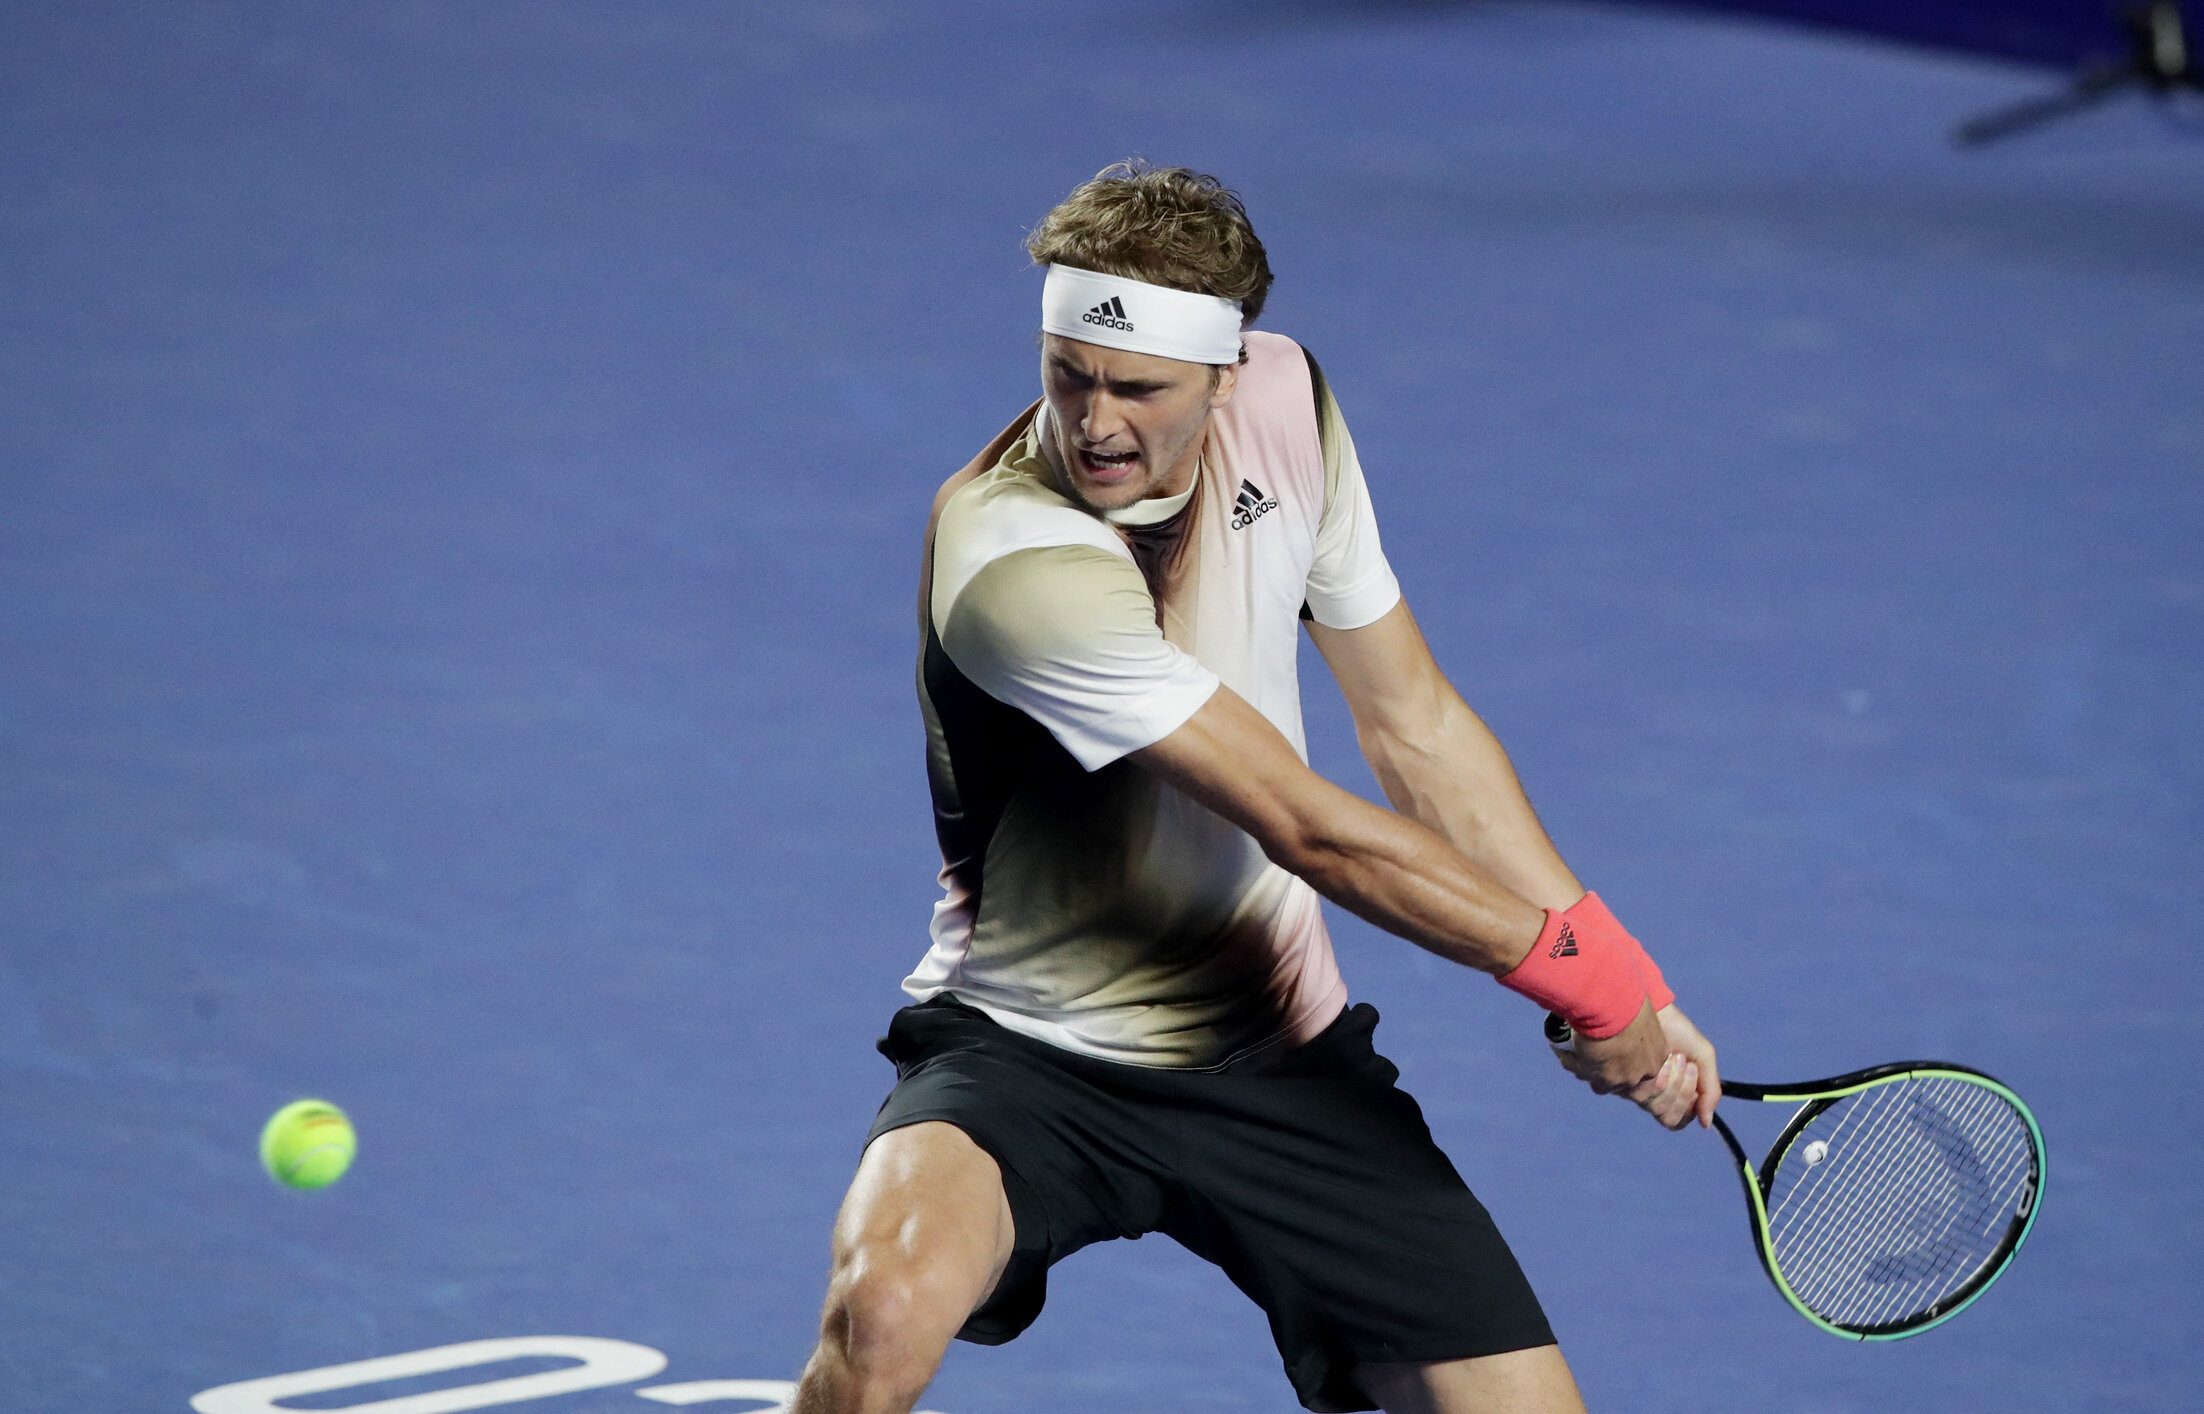 Zverev seals win just before 5 am in latest ever finish